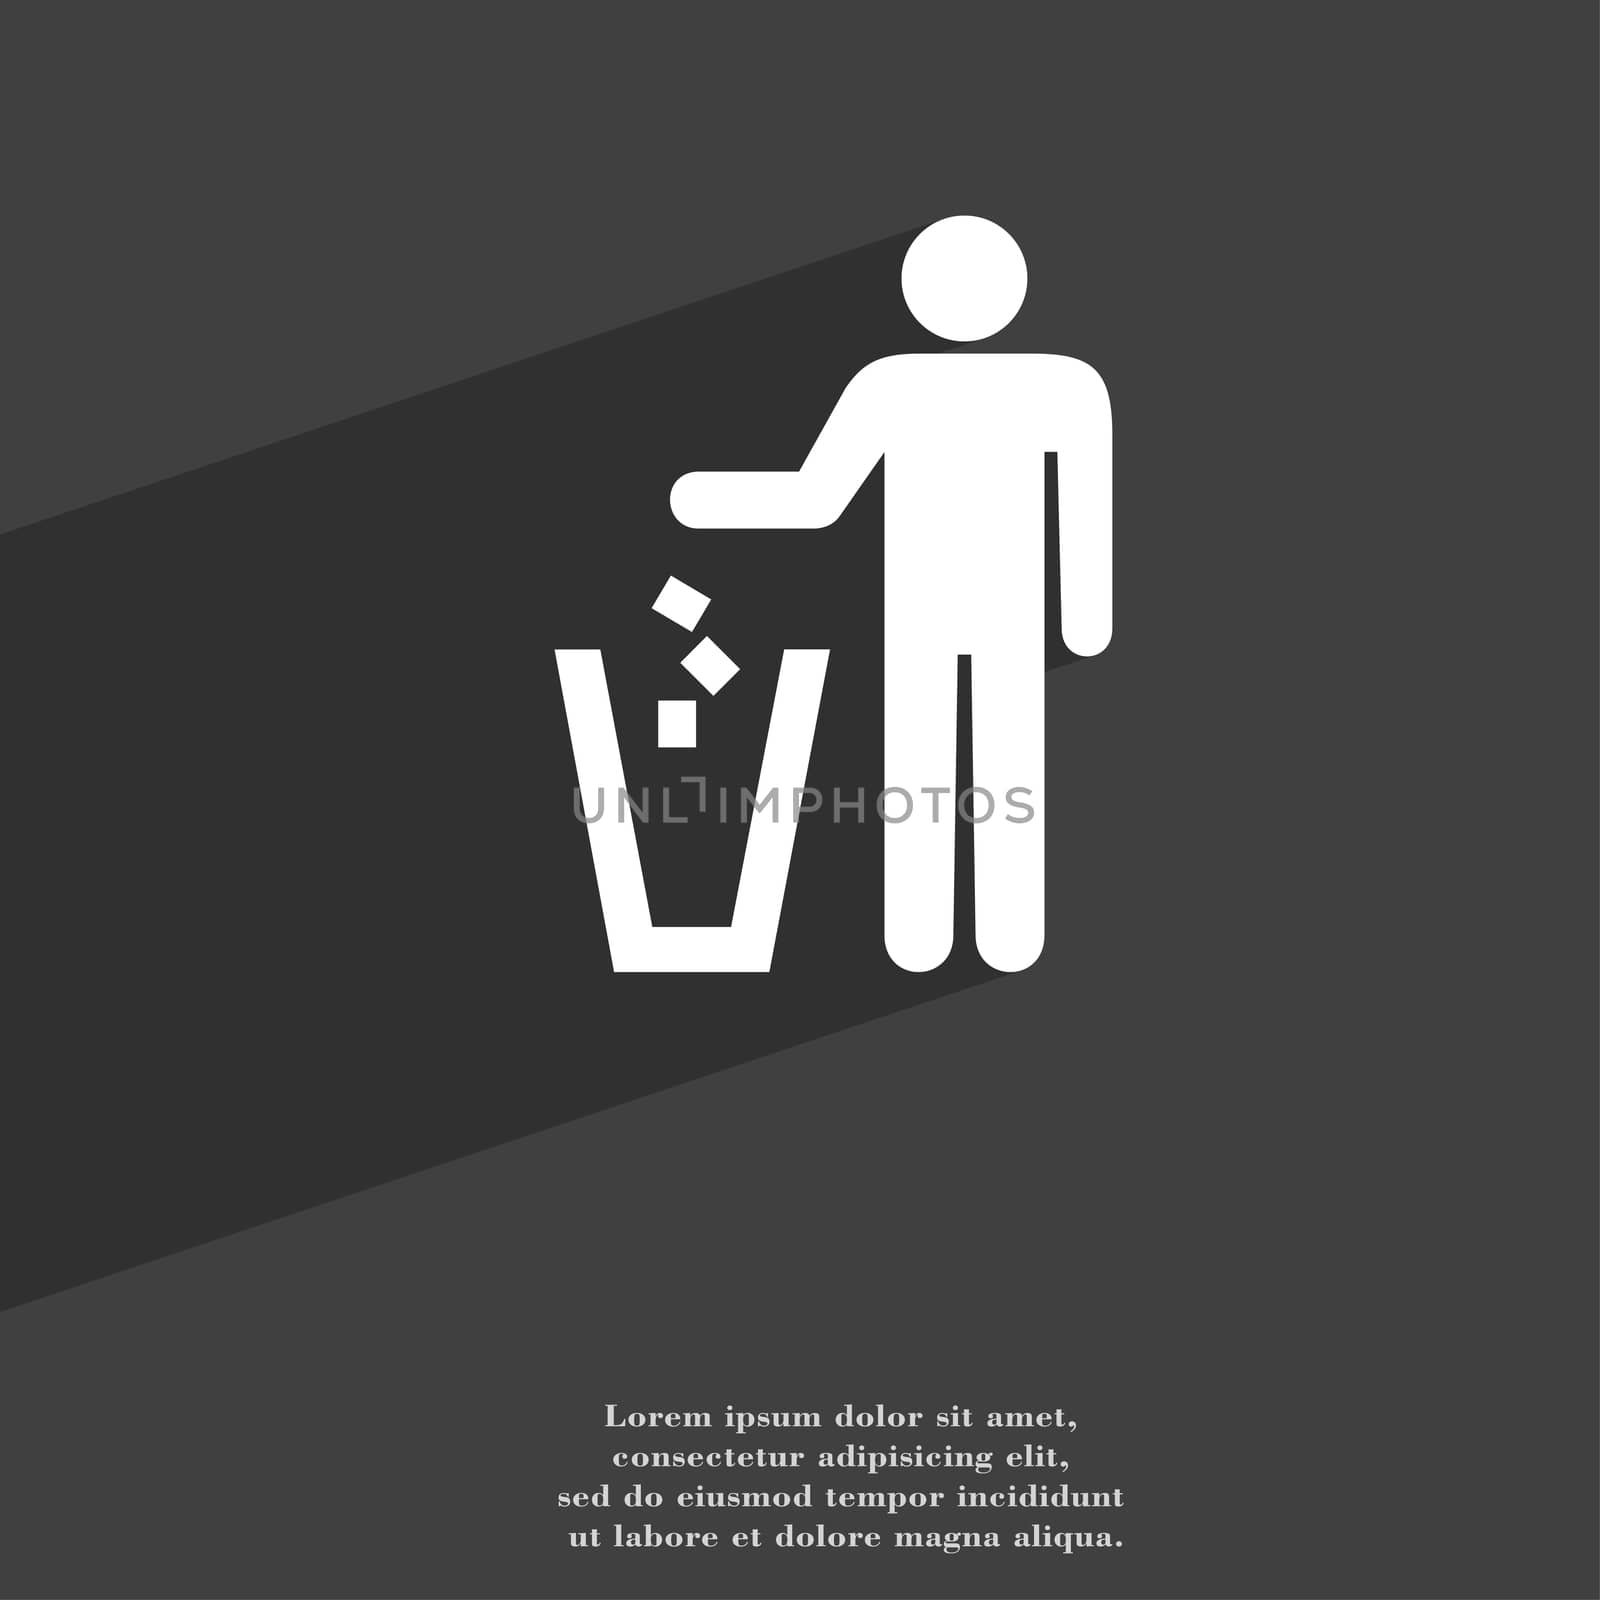 throw away the trash icon symbol Flat modern web design with long shadow and space for your text. illustration